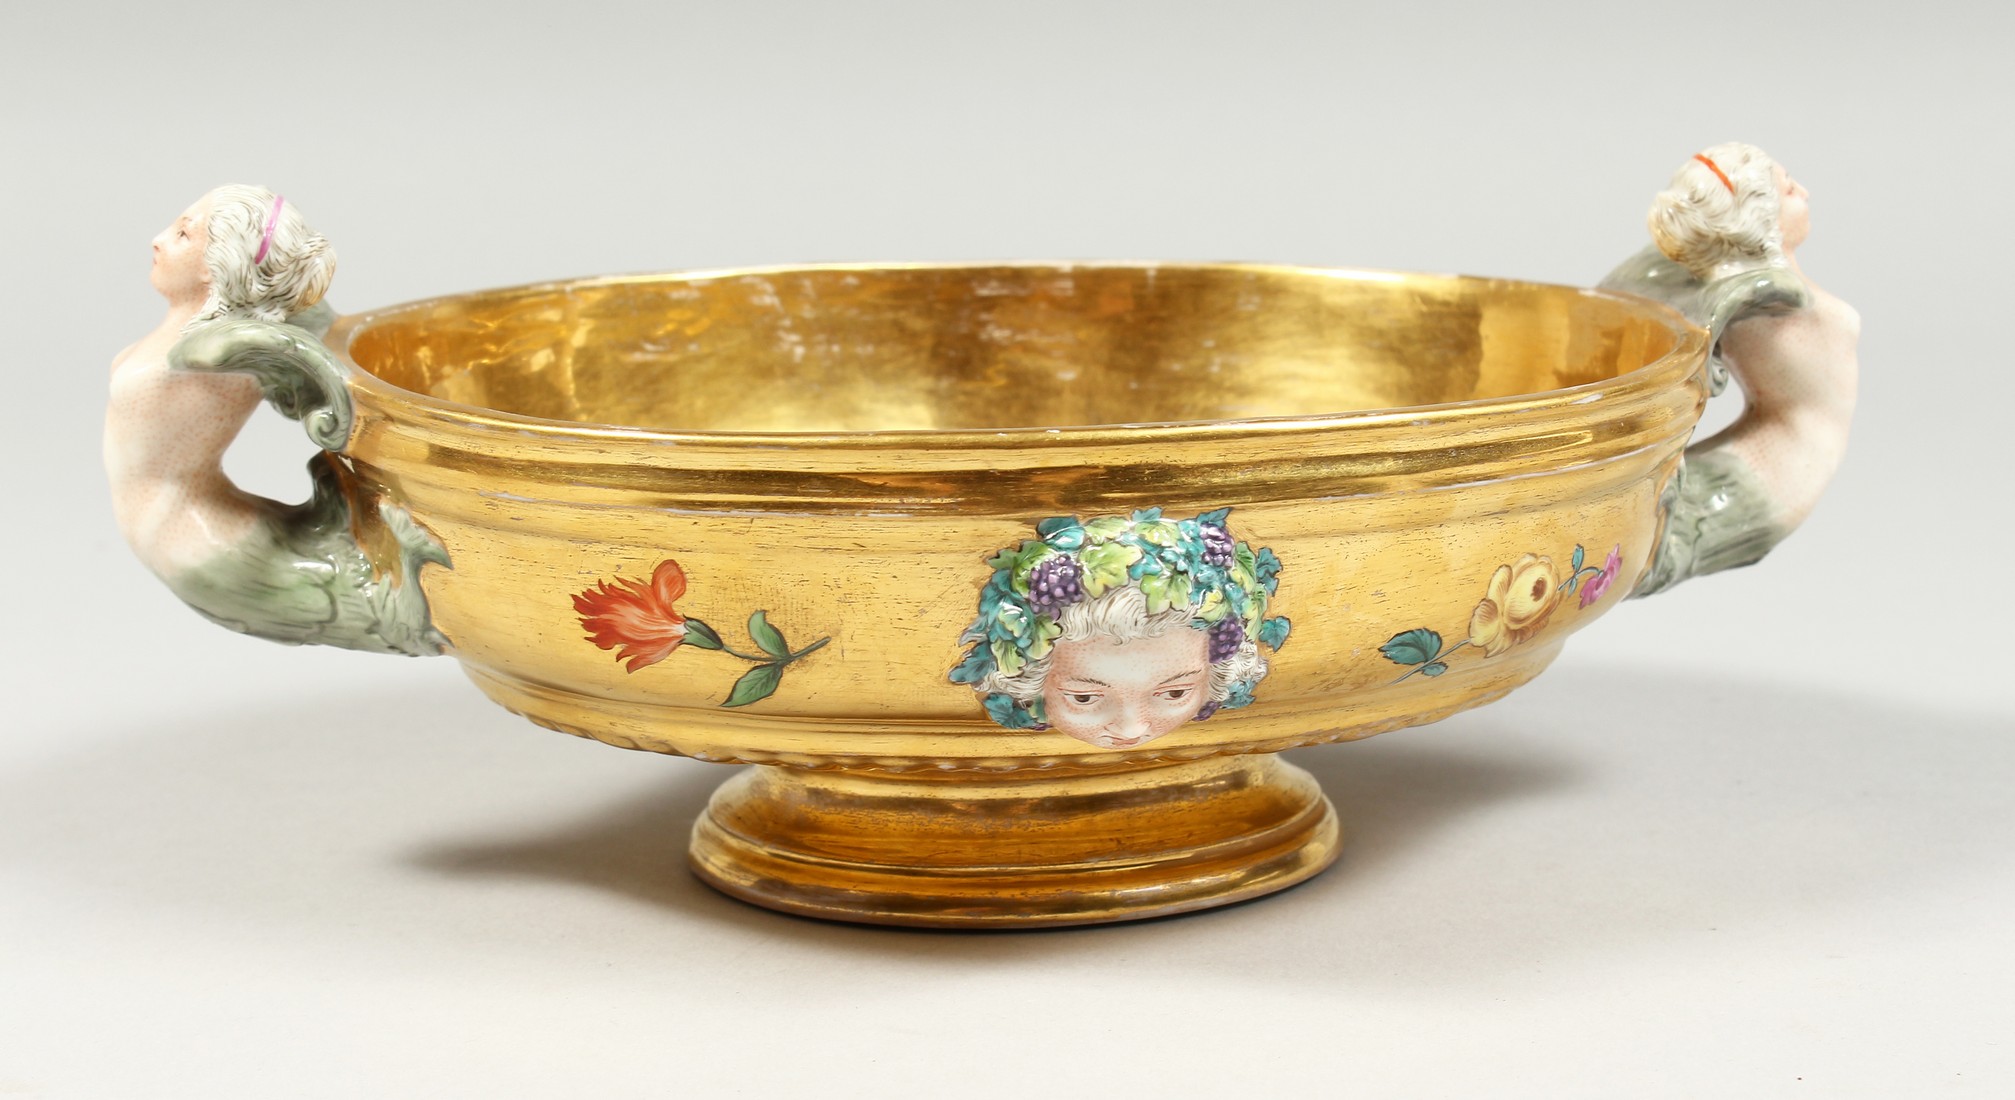 A GOOD BERLIN GILT GROUND OVAL BOWL with mermaid handles, masks and flowers. 8.5ins long